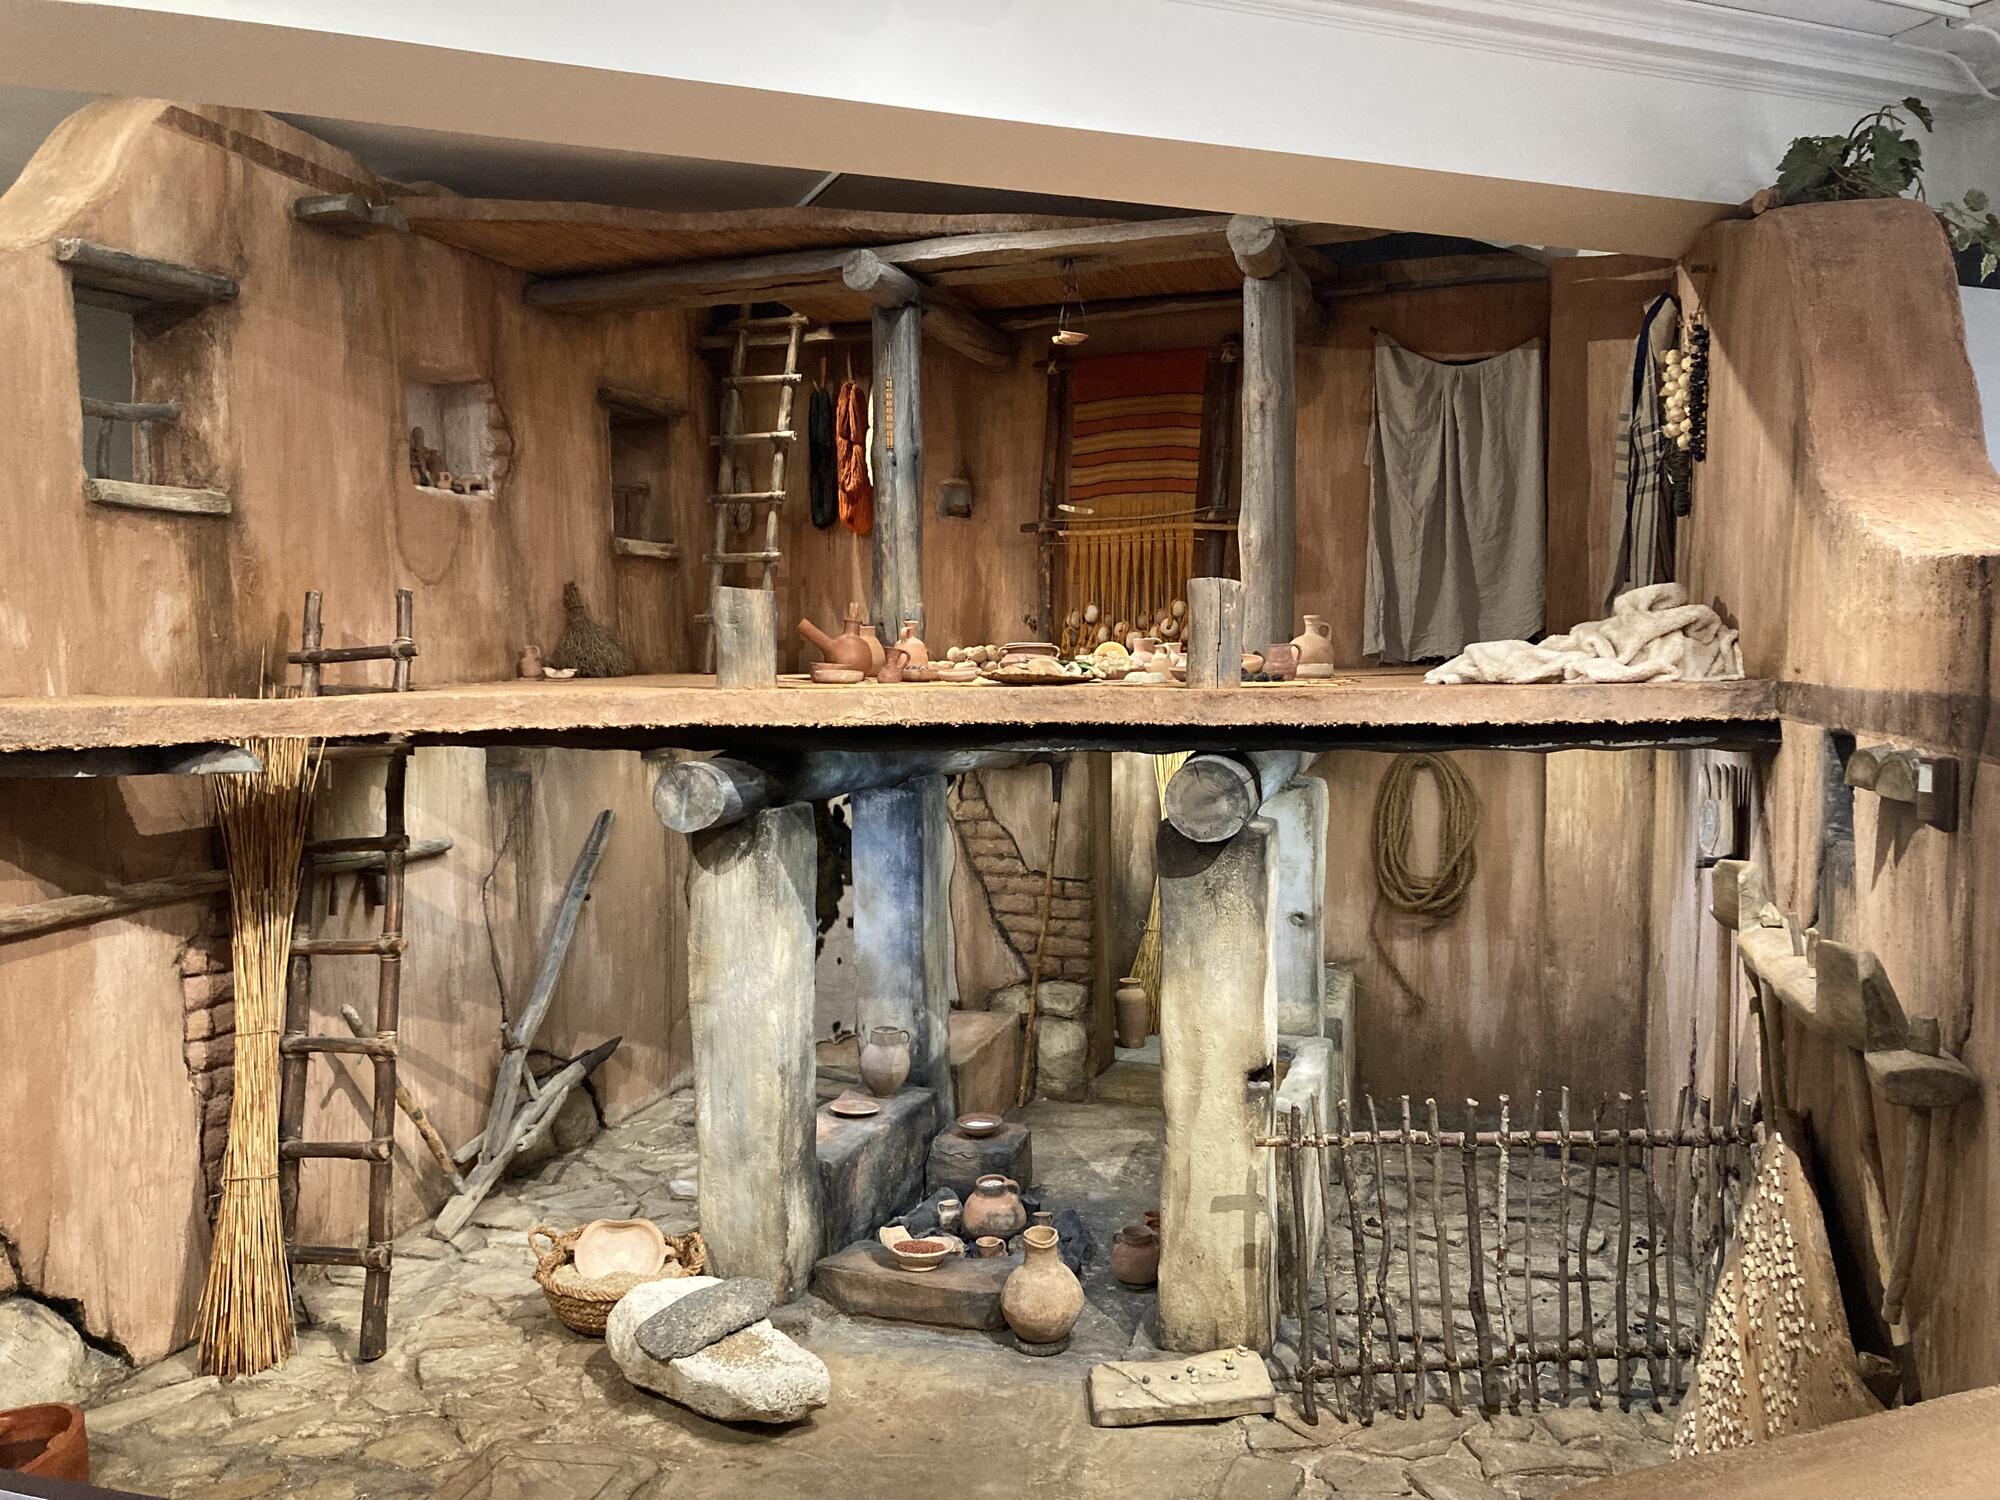 Modern reconstruction of a late Iron Age village house.